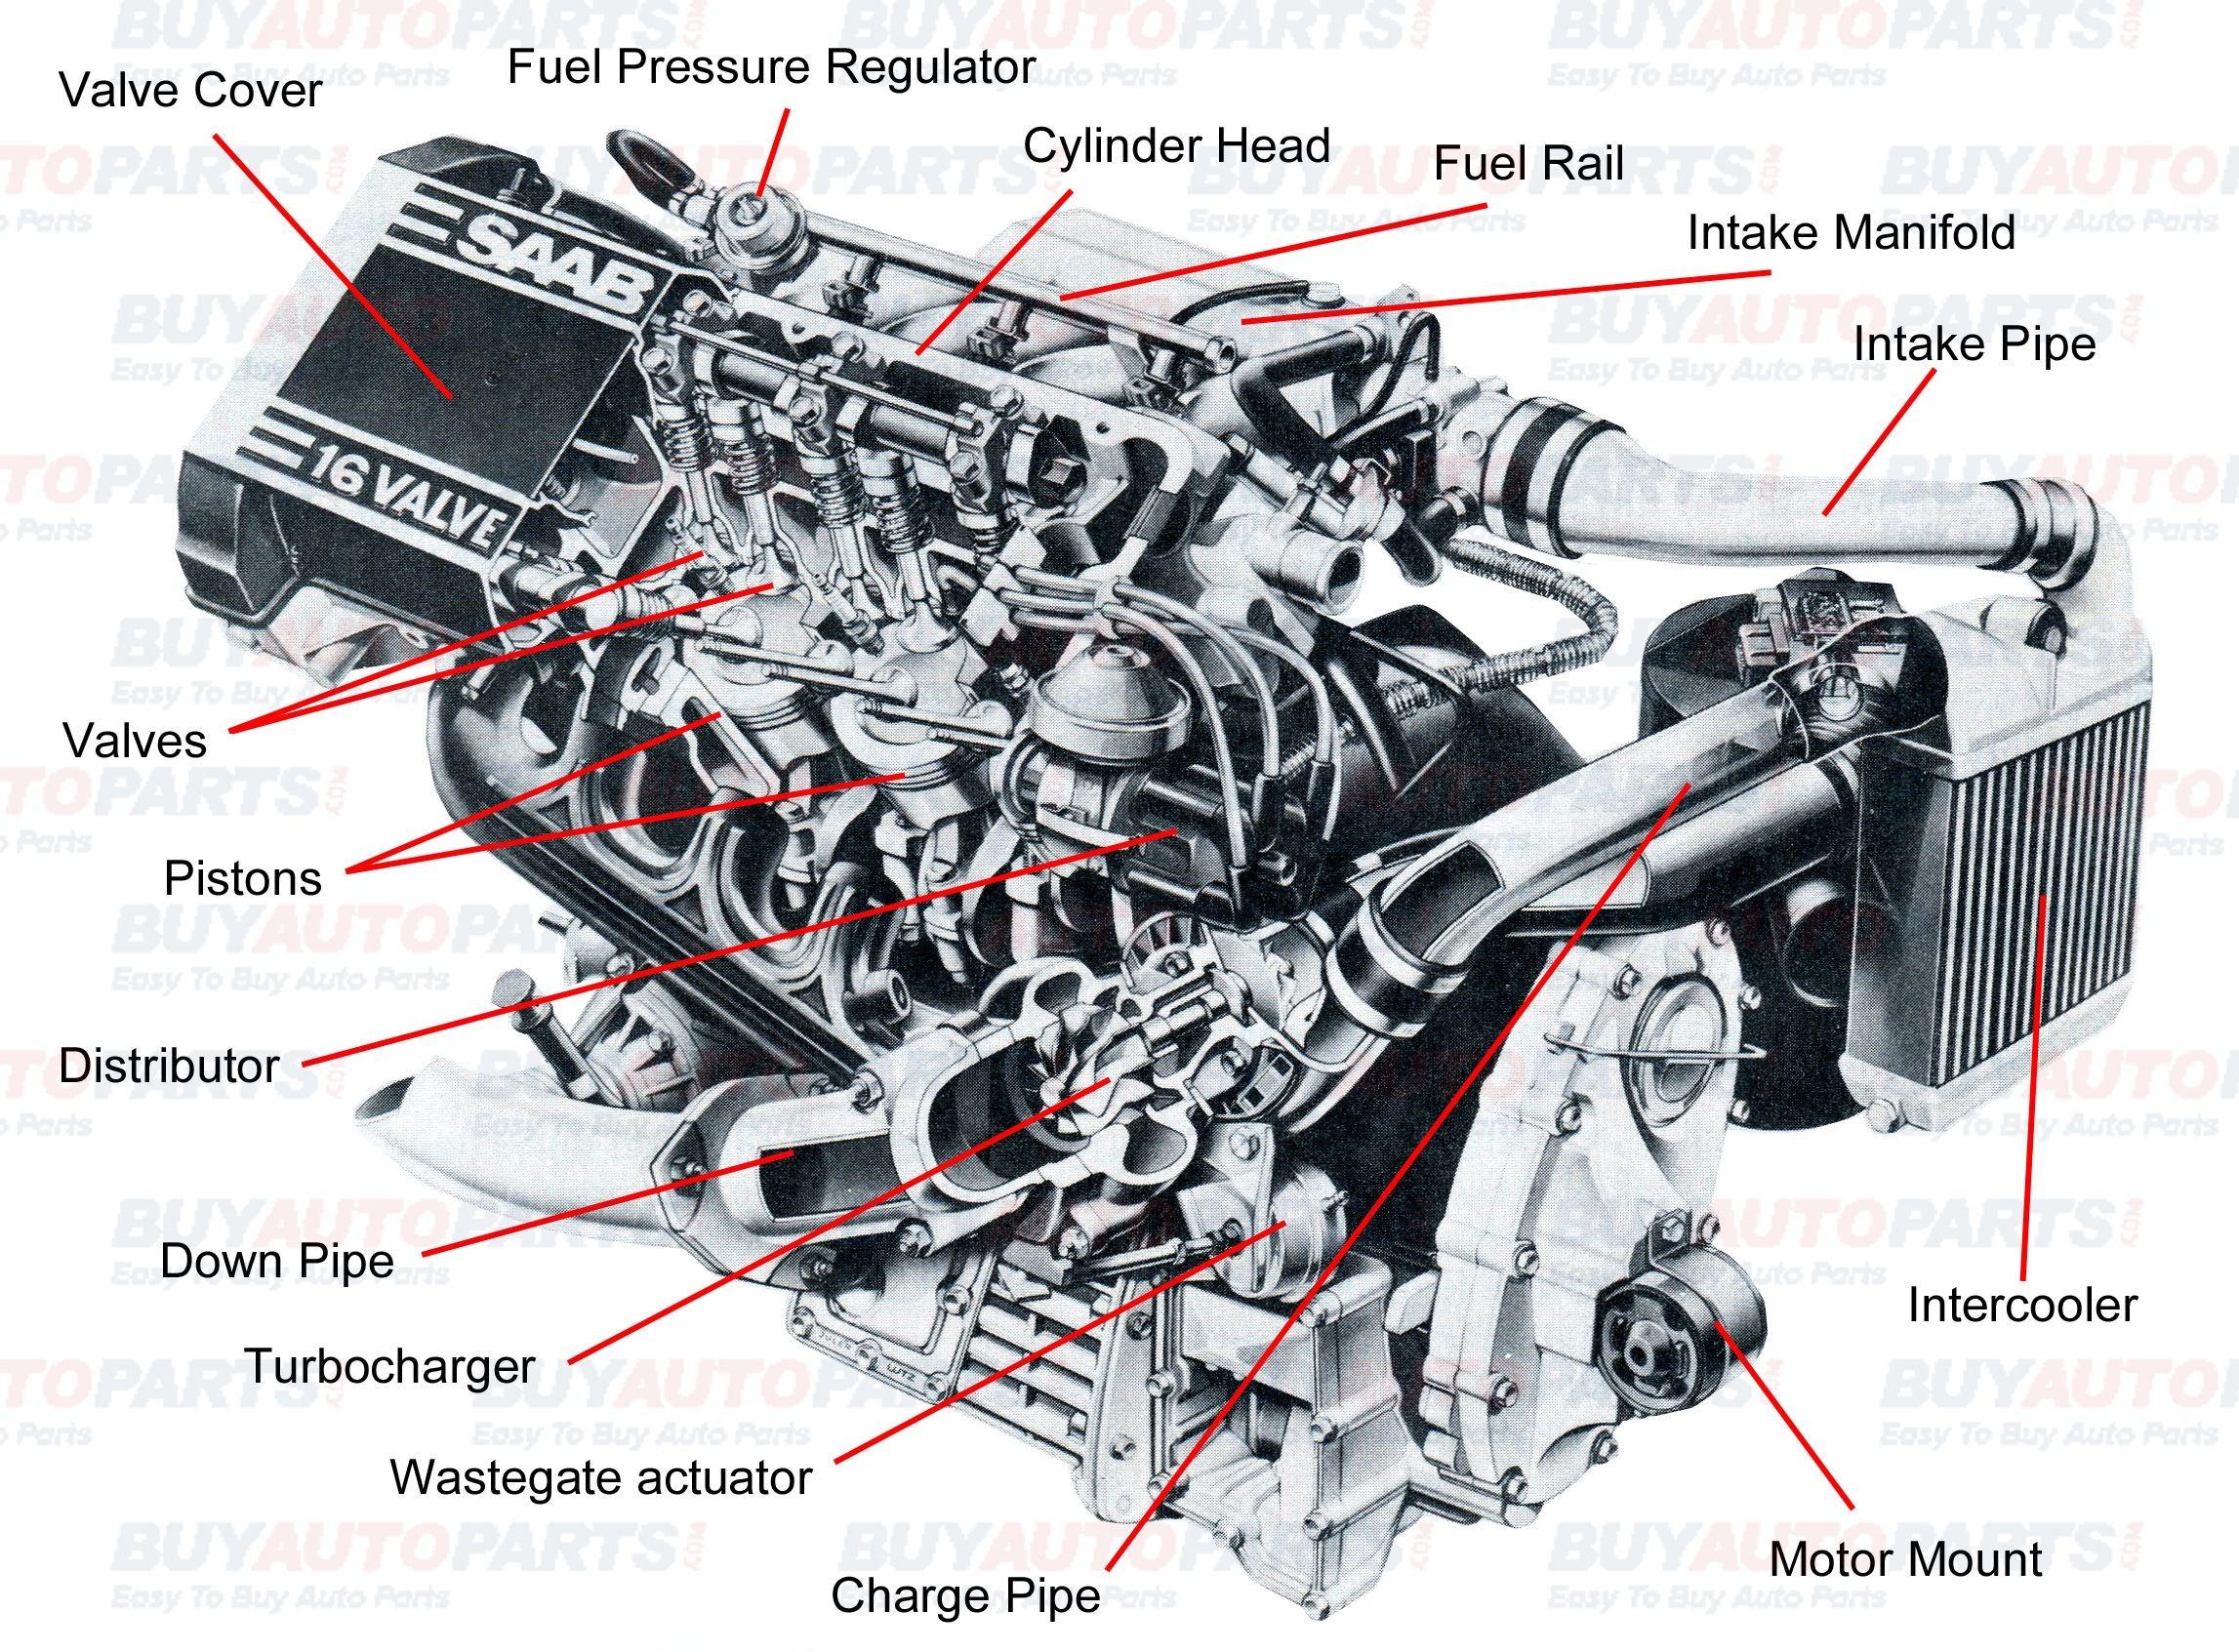 Car Engine Components Diagram All Internal Bustion Engines Have the Same Basic Ponents the Of Car Engine Components Diagram